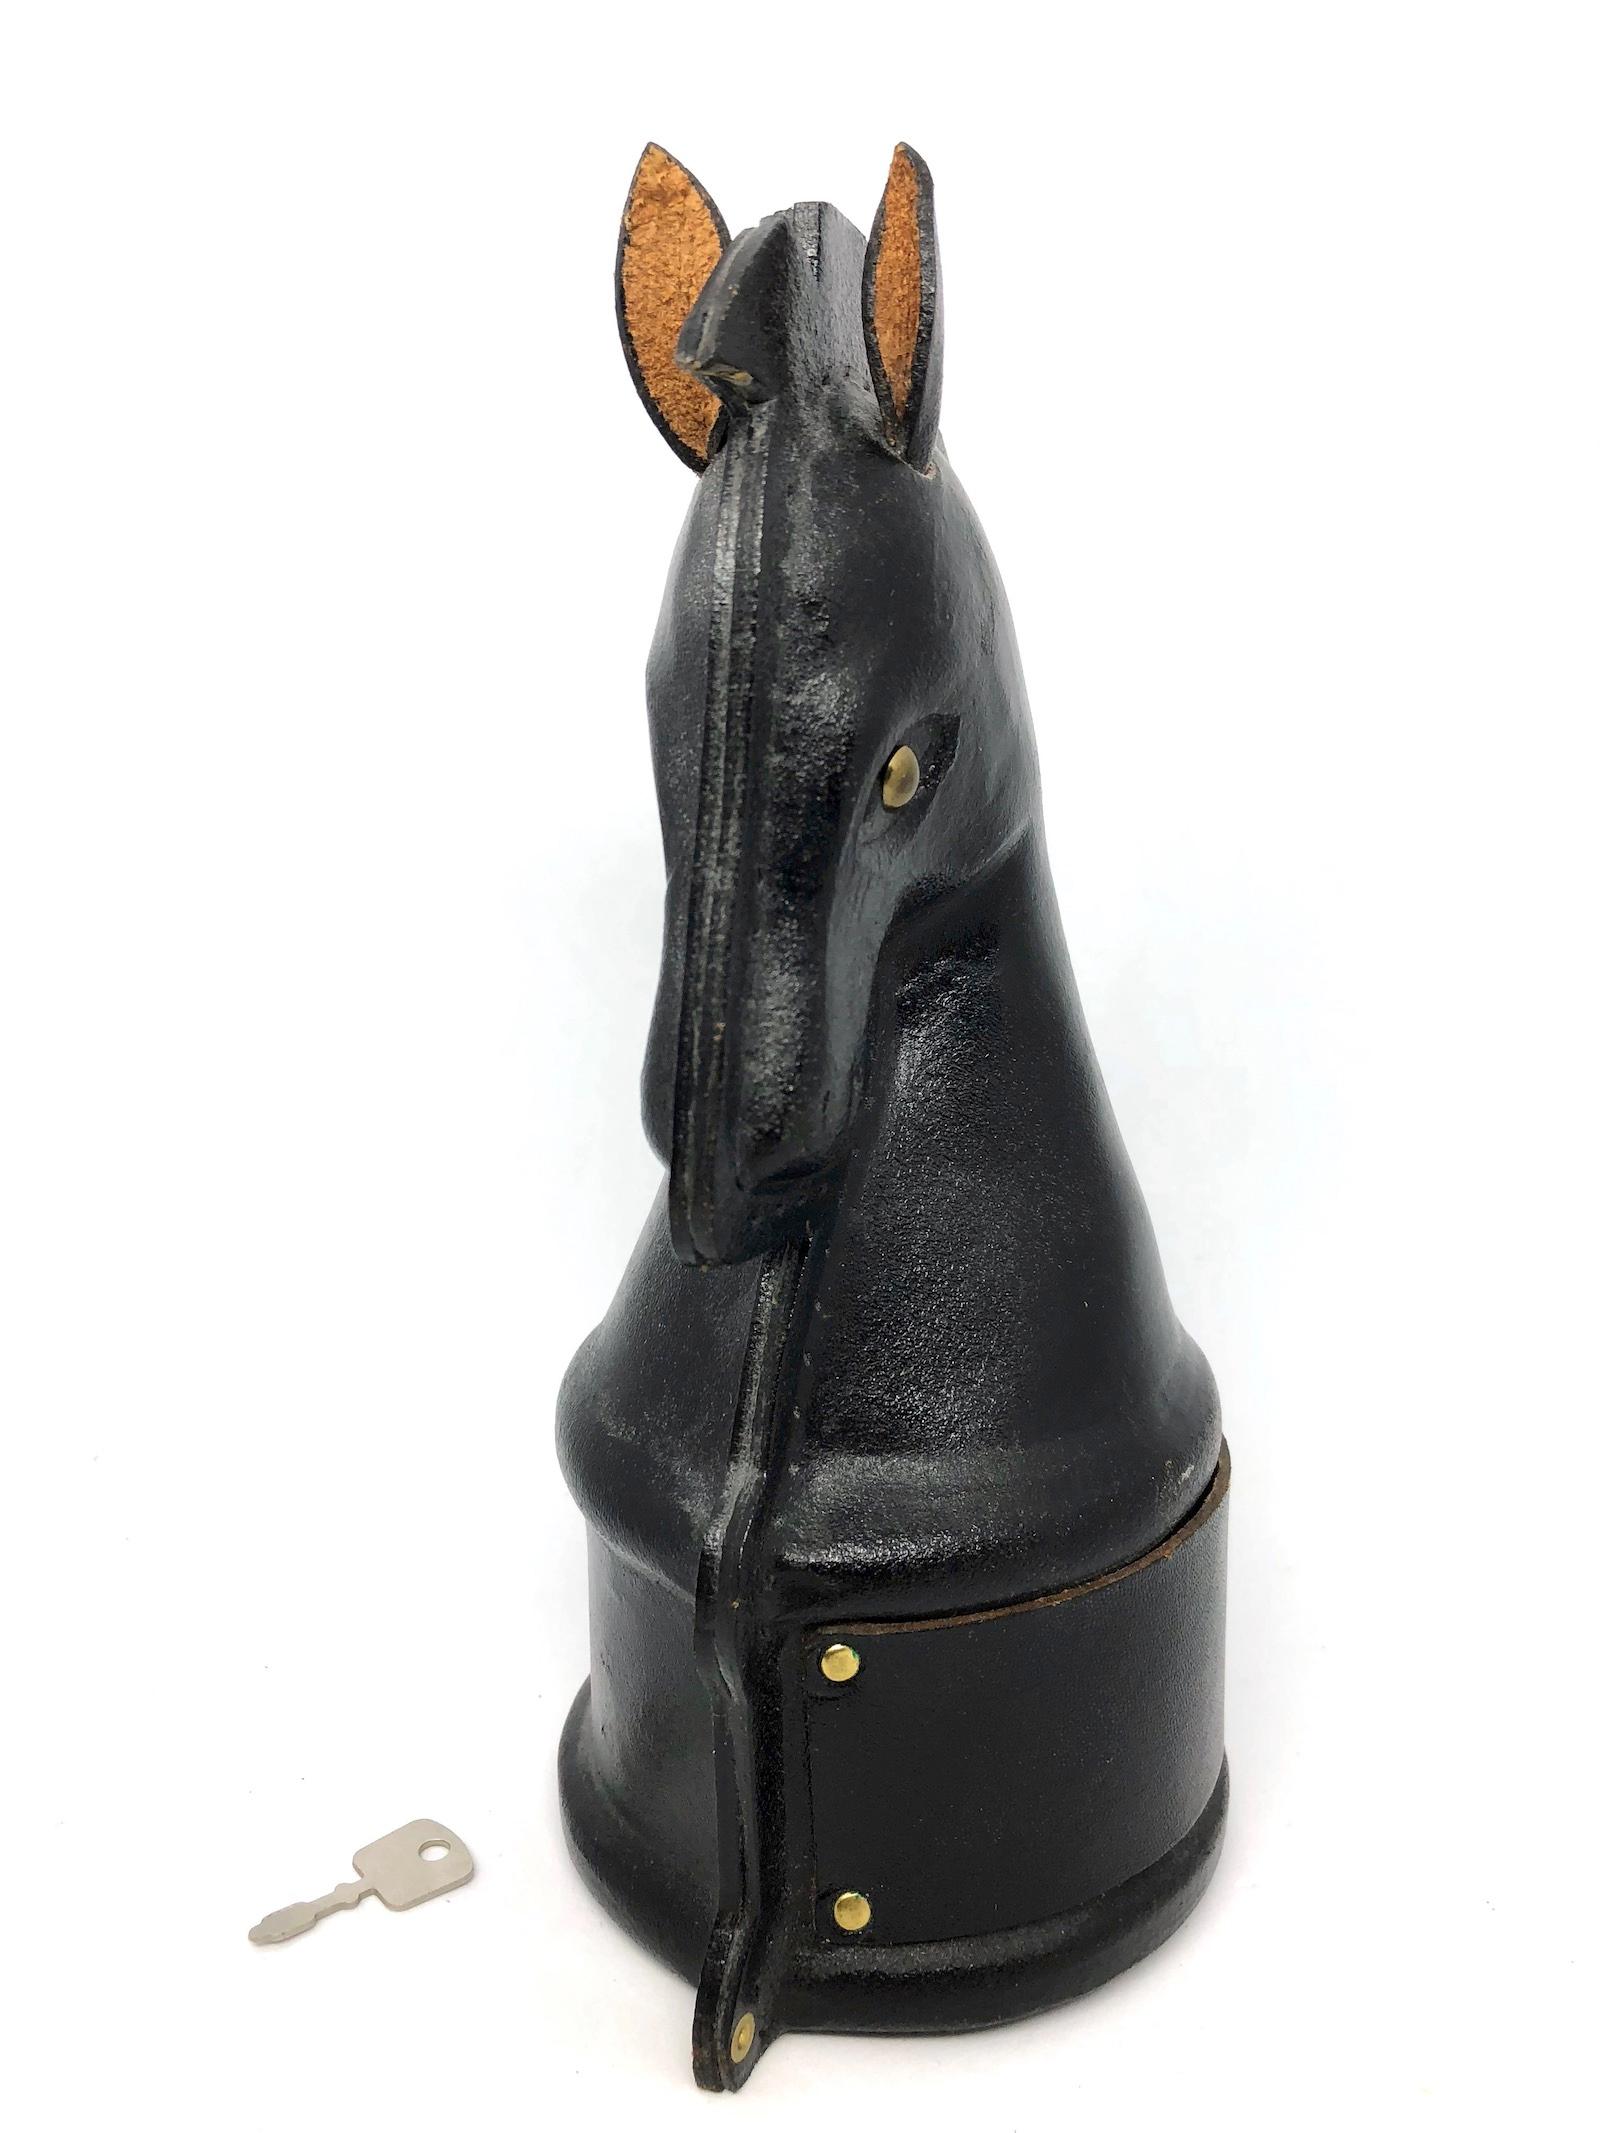 Horse Money Box Piggy Bank Made of Leather Mid-Century Modern, 1970s (Metall)